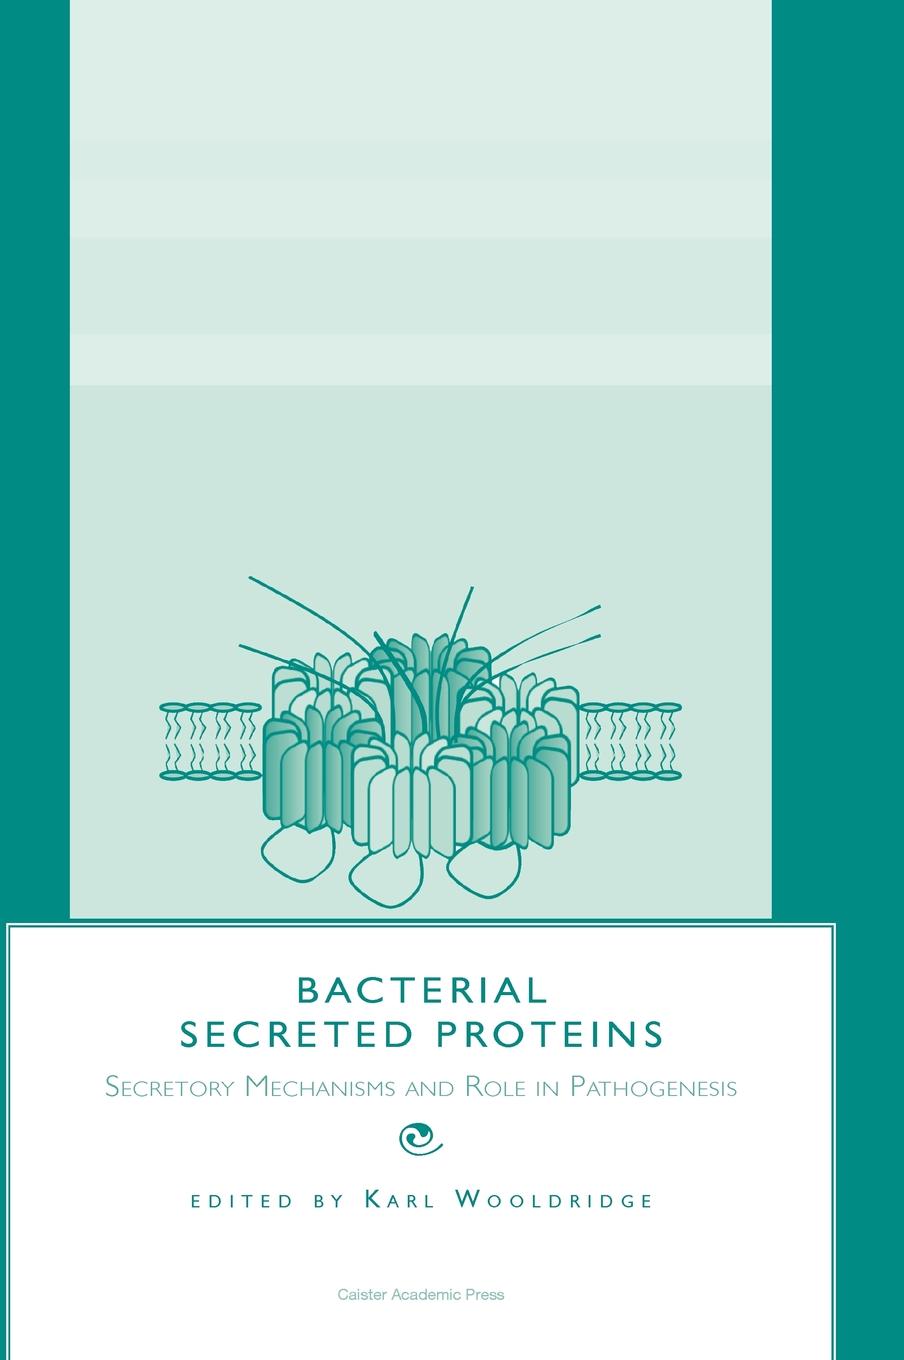 Bacterial Secreted Proteins book